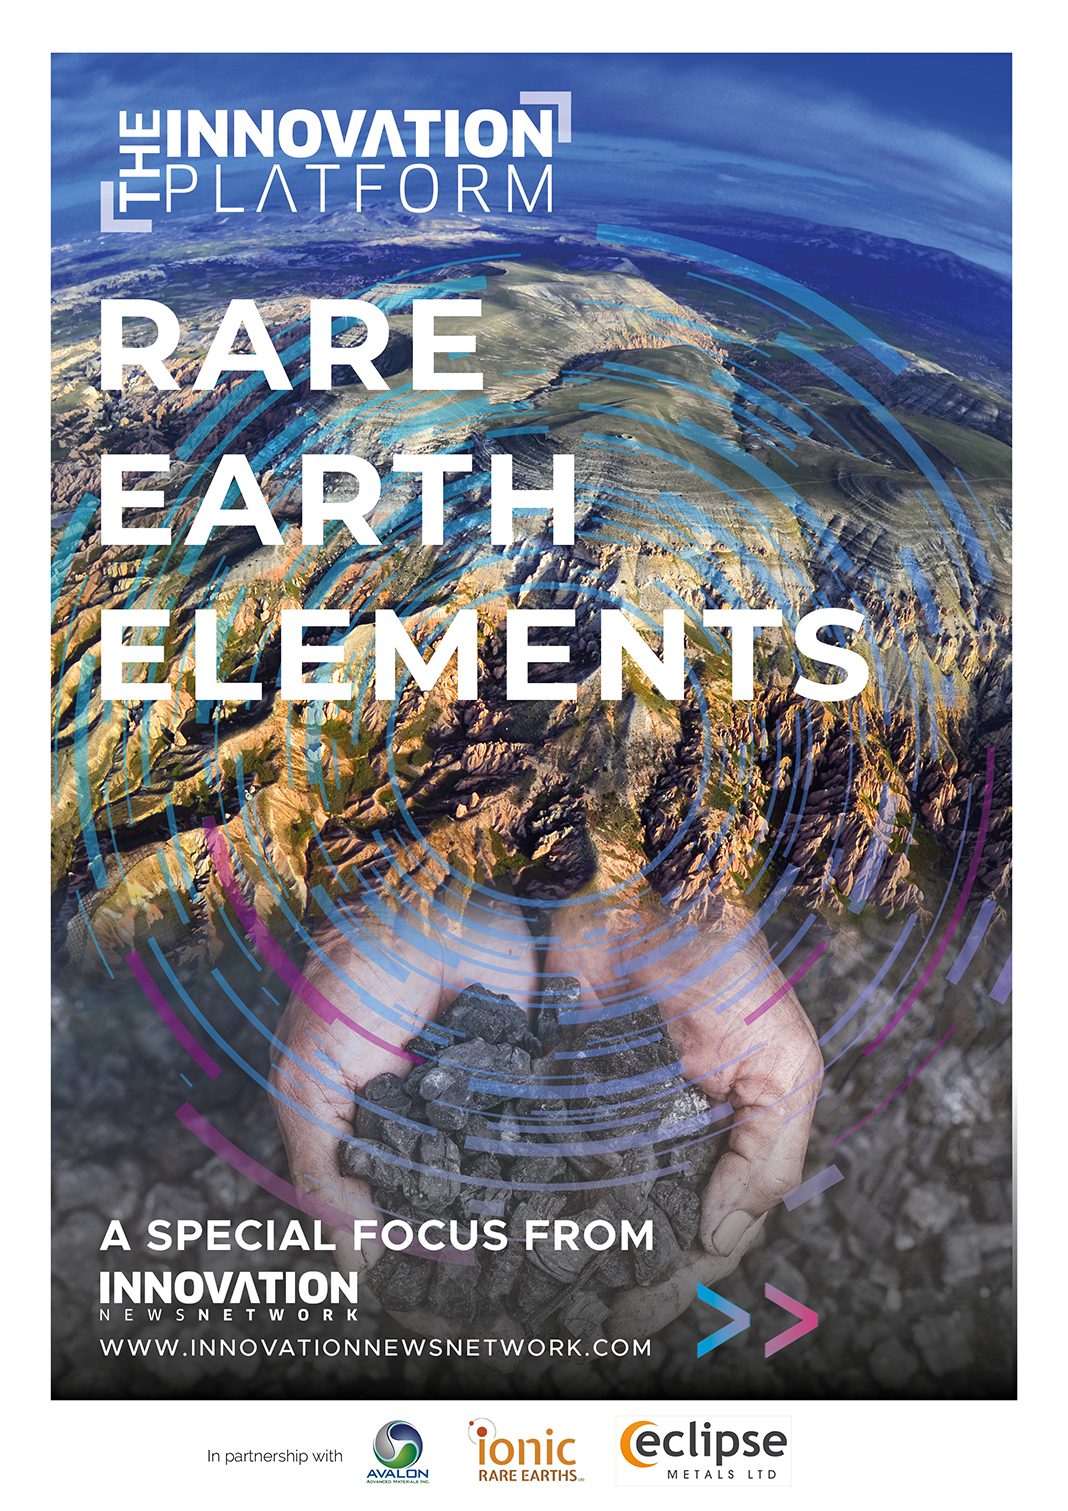 Analysing challenges in meeting the supply and demand for rare earth elements